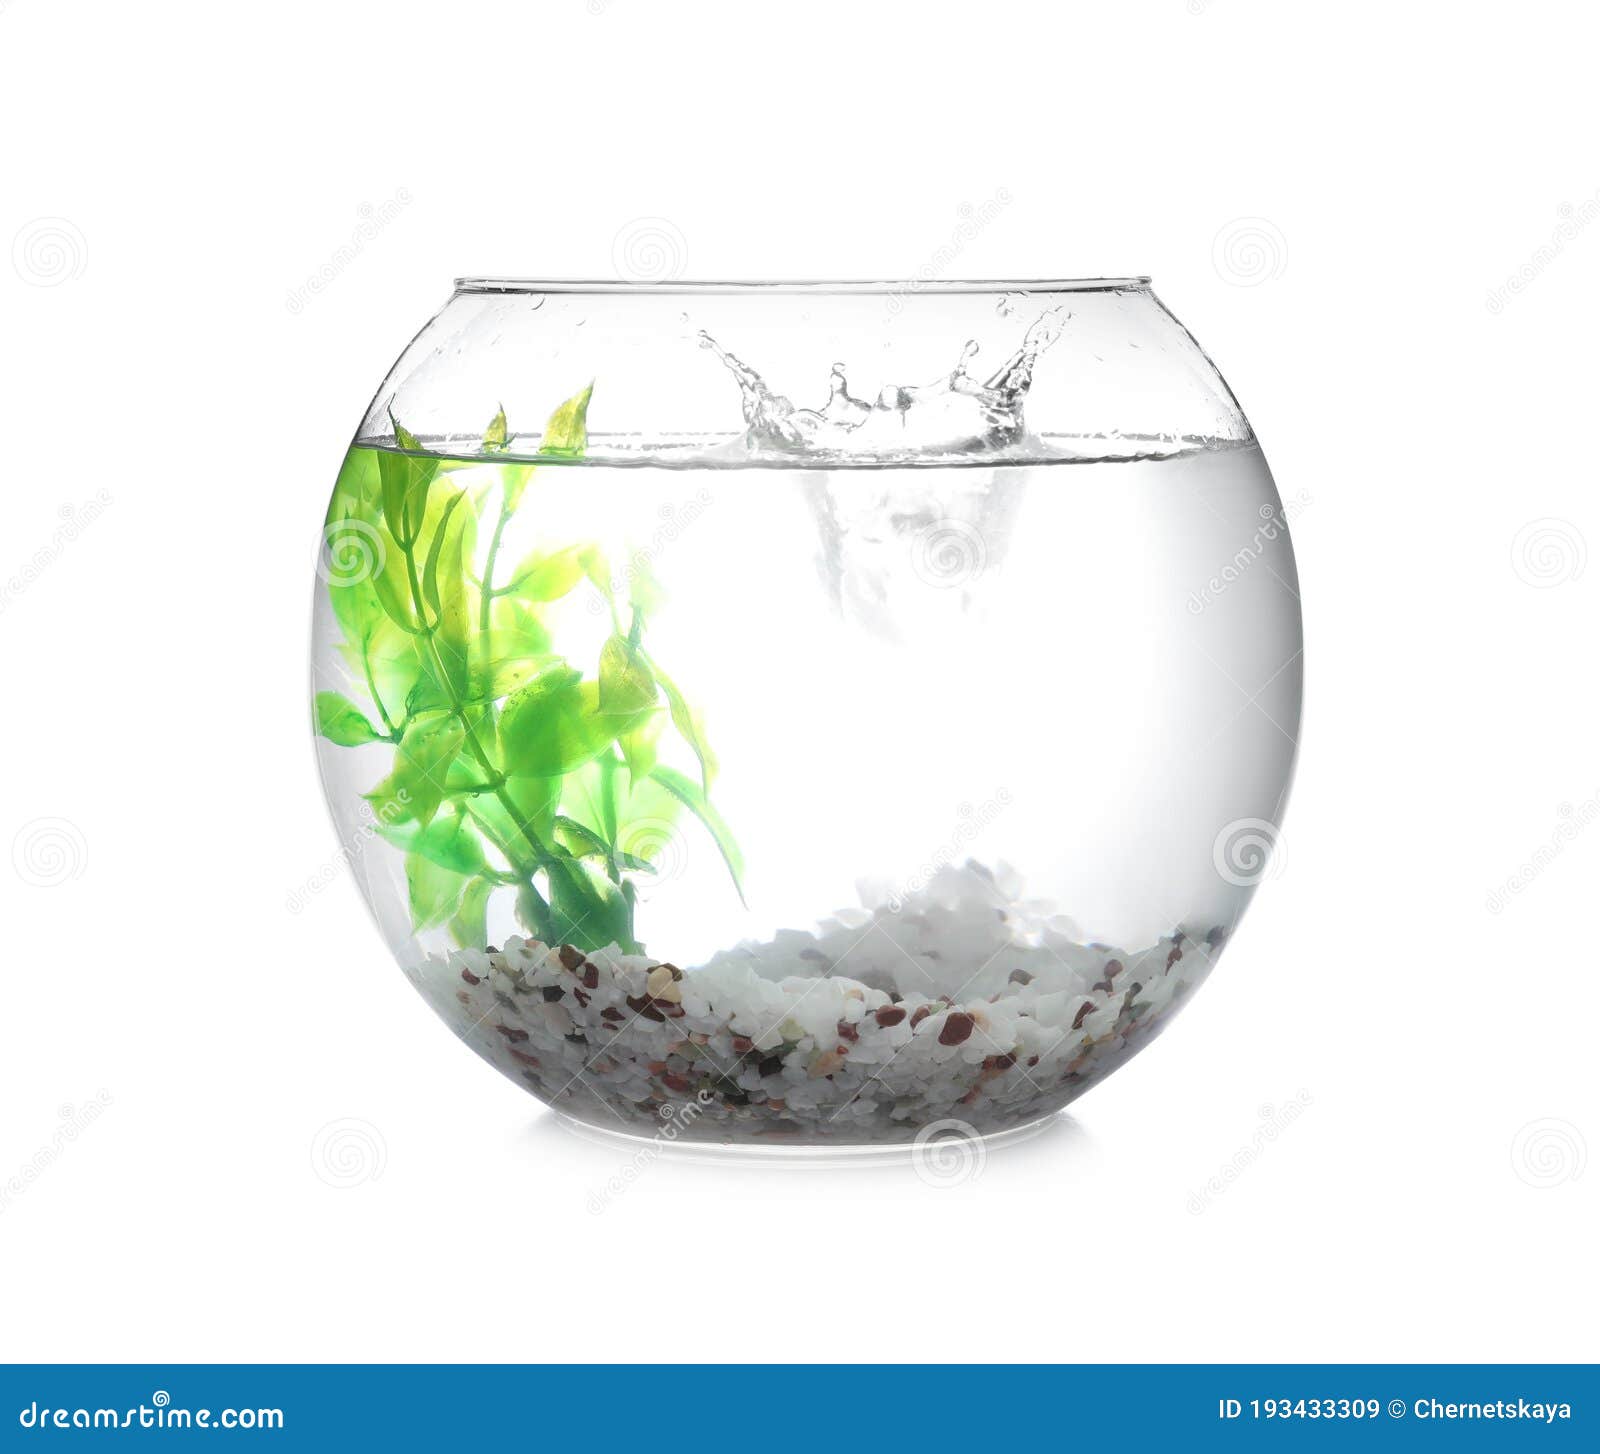 Splash of Water in Round Fish Bowl with Decorative Plant and